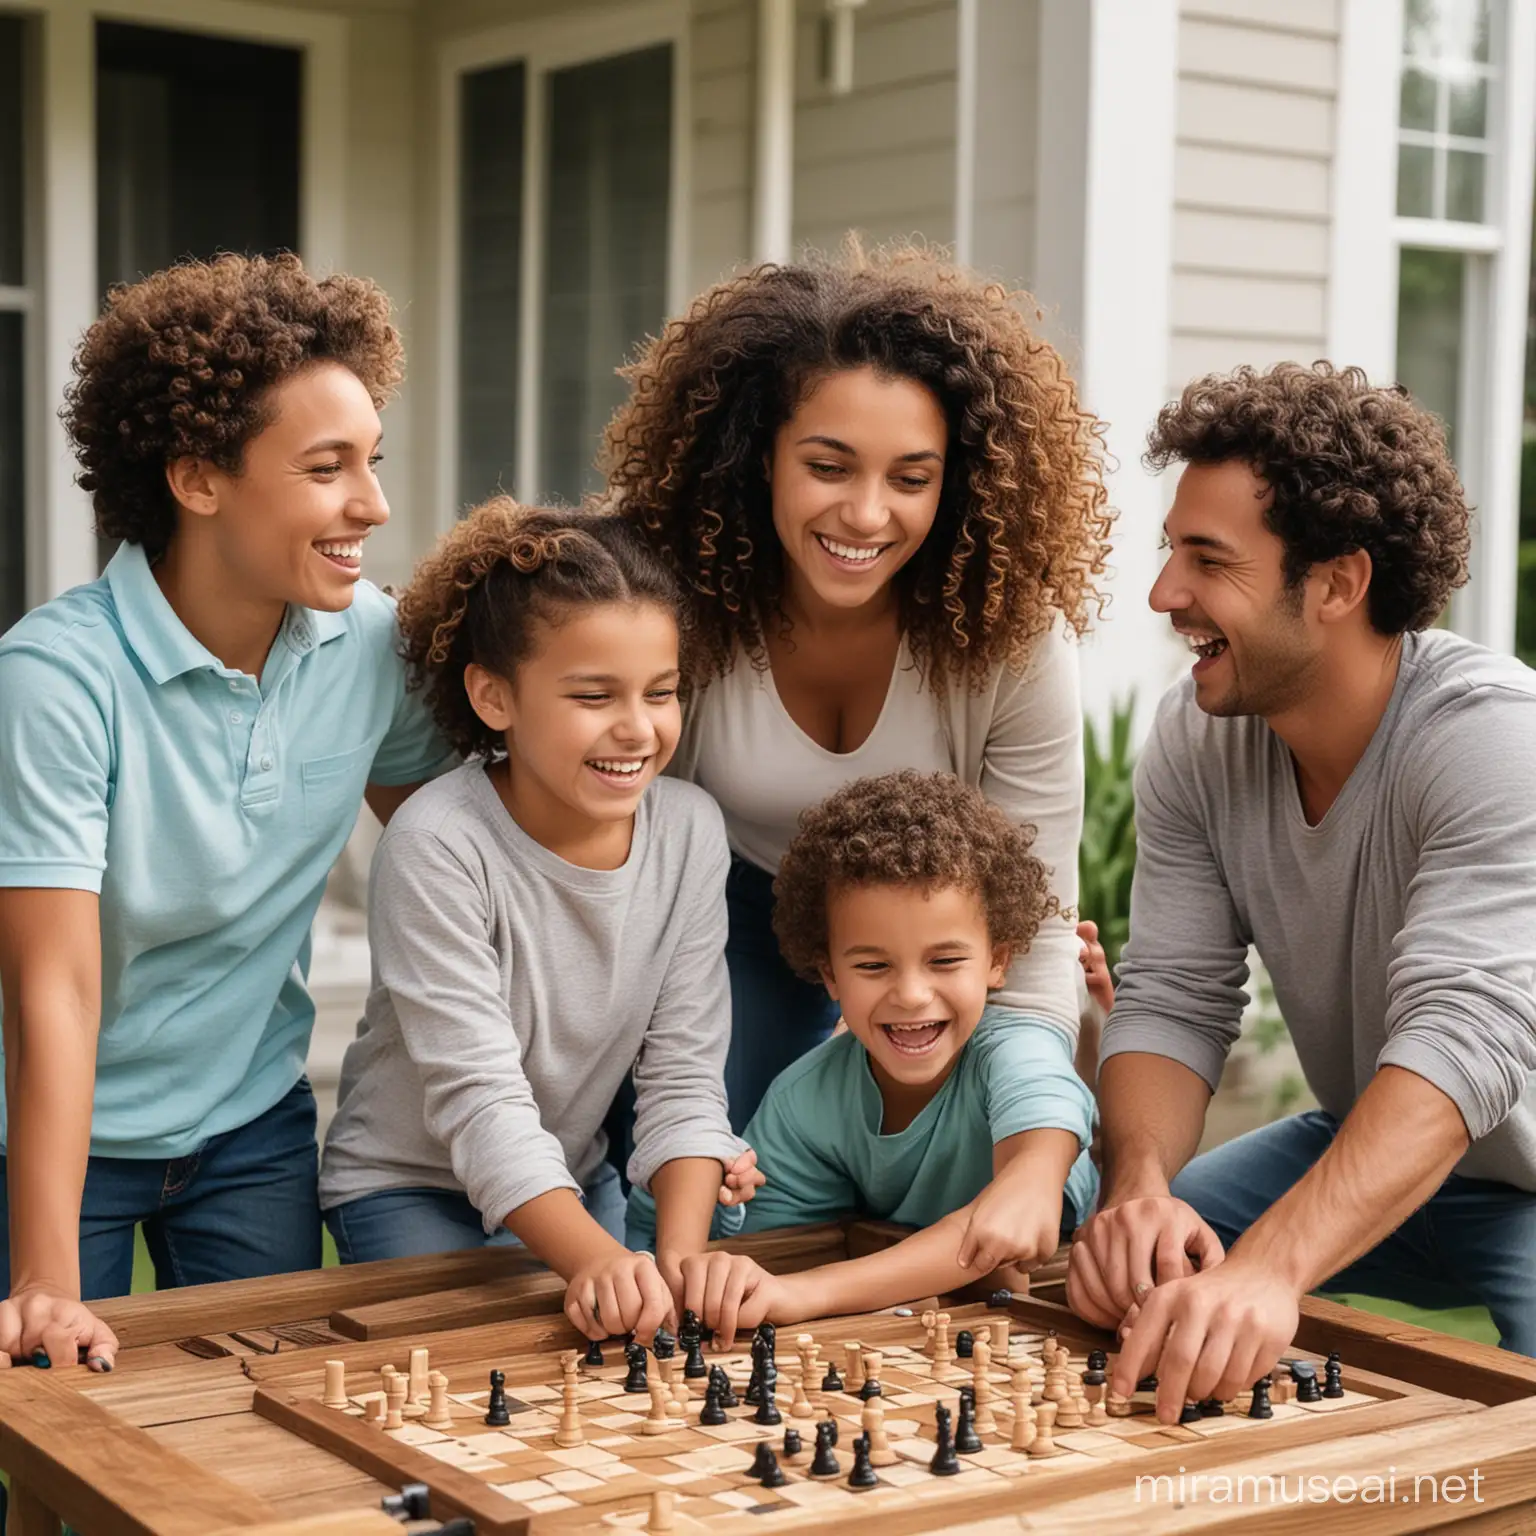 Joyful Family Games 30YearOld Woman with Curly Hair Husband and Three Children in Beautiful Home Setting